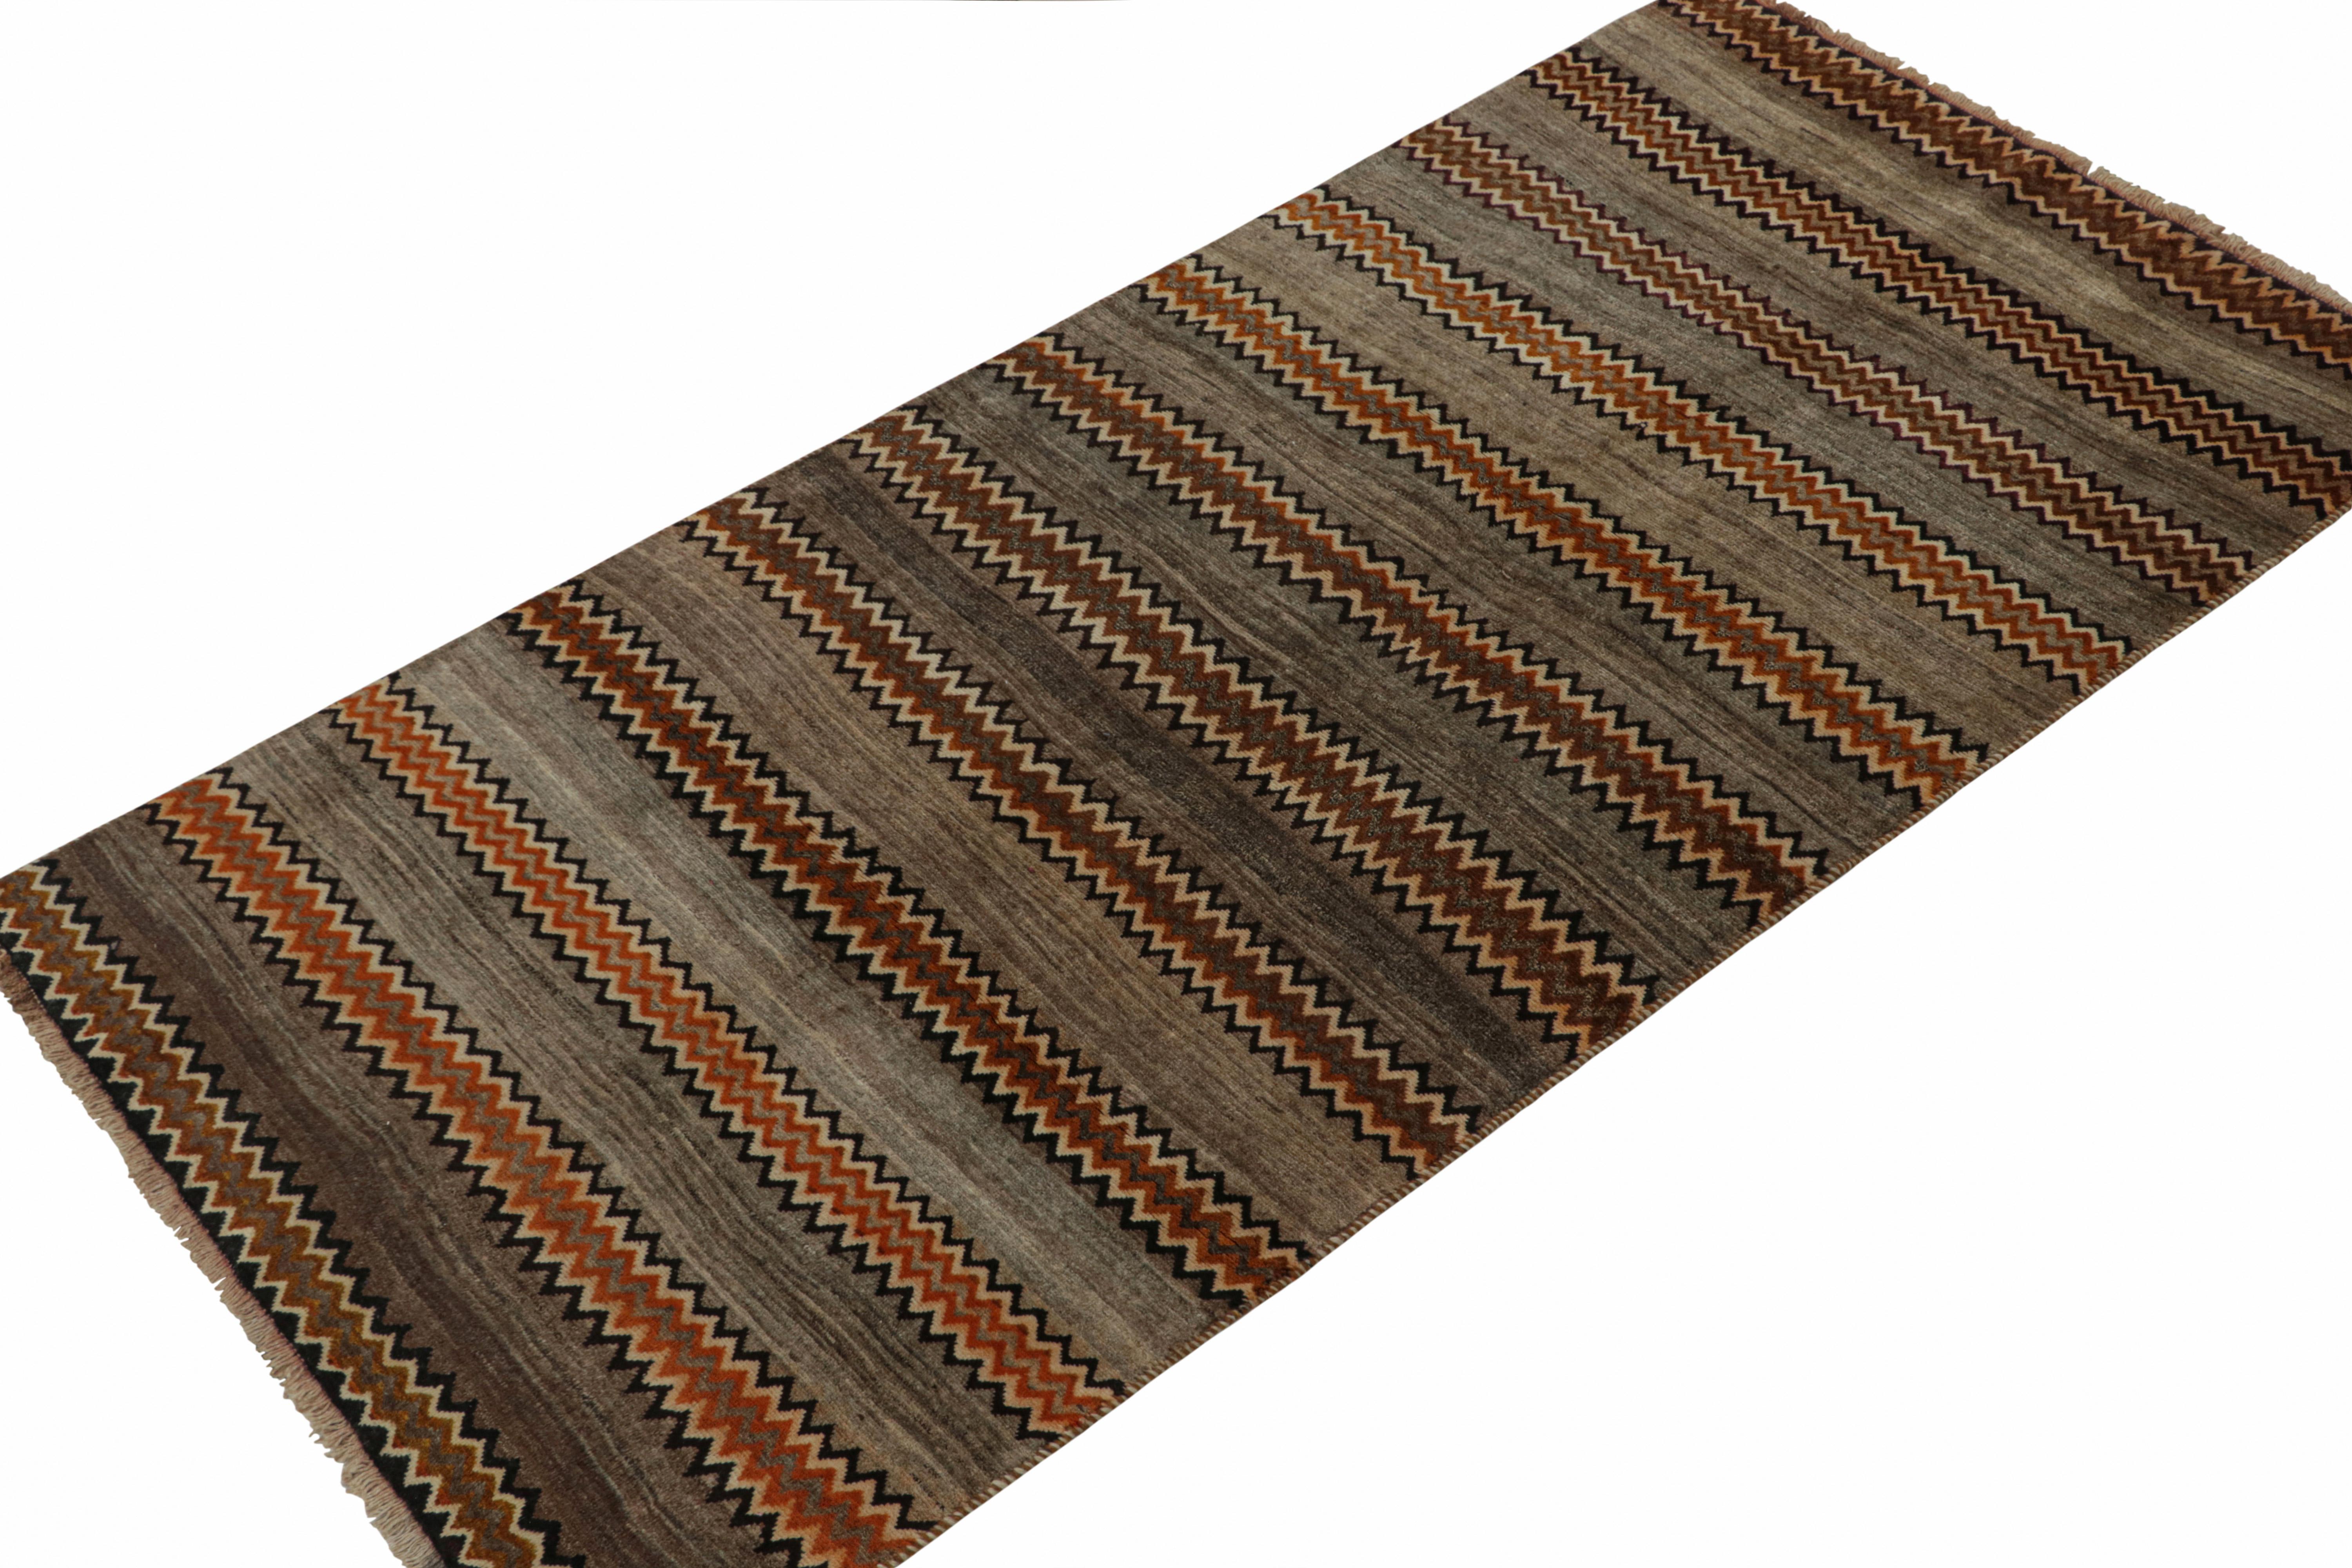 A vintage 5x10 Persian Gabbeh rug in the latest entries to Rug & Kilim’s curation of rare tribal pieces. Hand-knotted in wool circa 1950-1960.

On the Design:

This gray rug enjoys stripes and chevron patterns alternating in beige-brown and